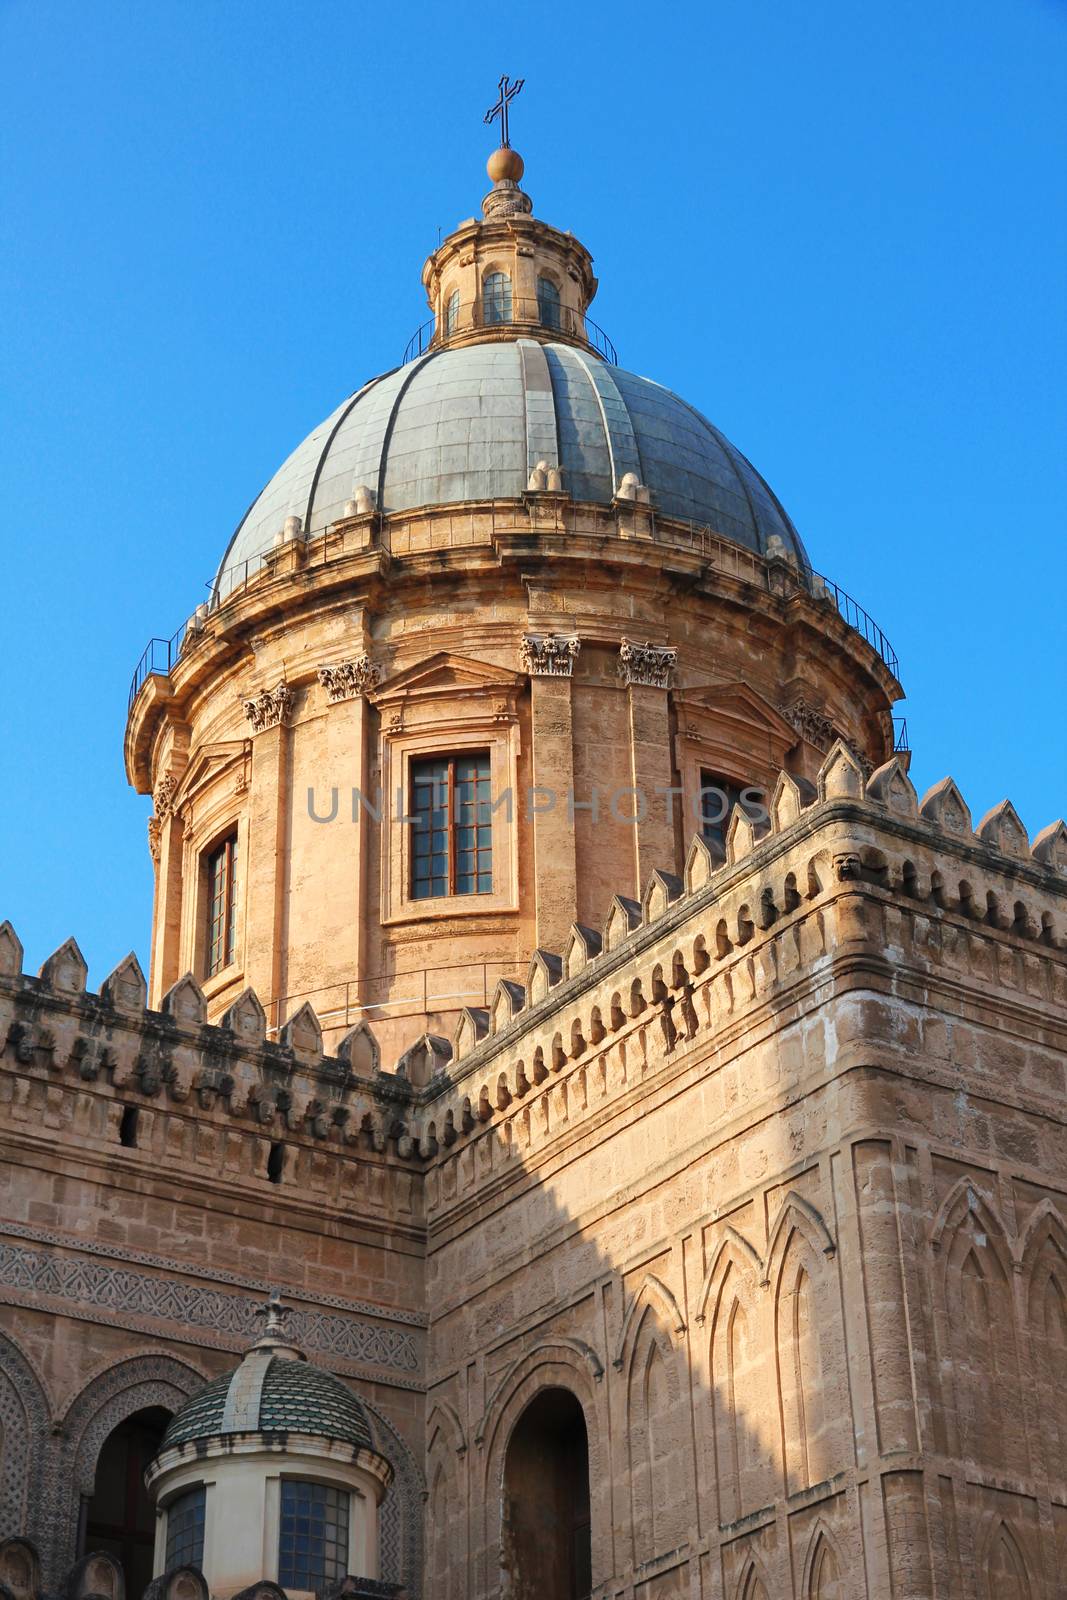 Italy. Sicily island. Palermo city. Cathedral (Duomo) at sunset